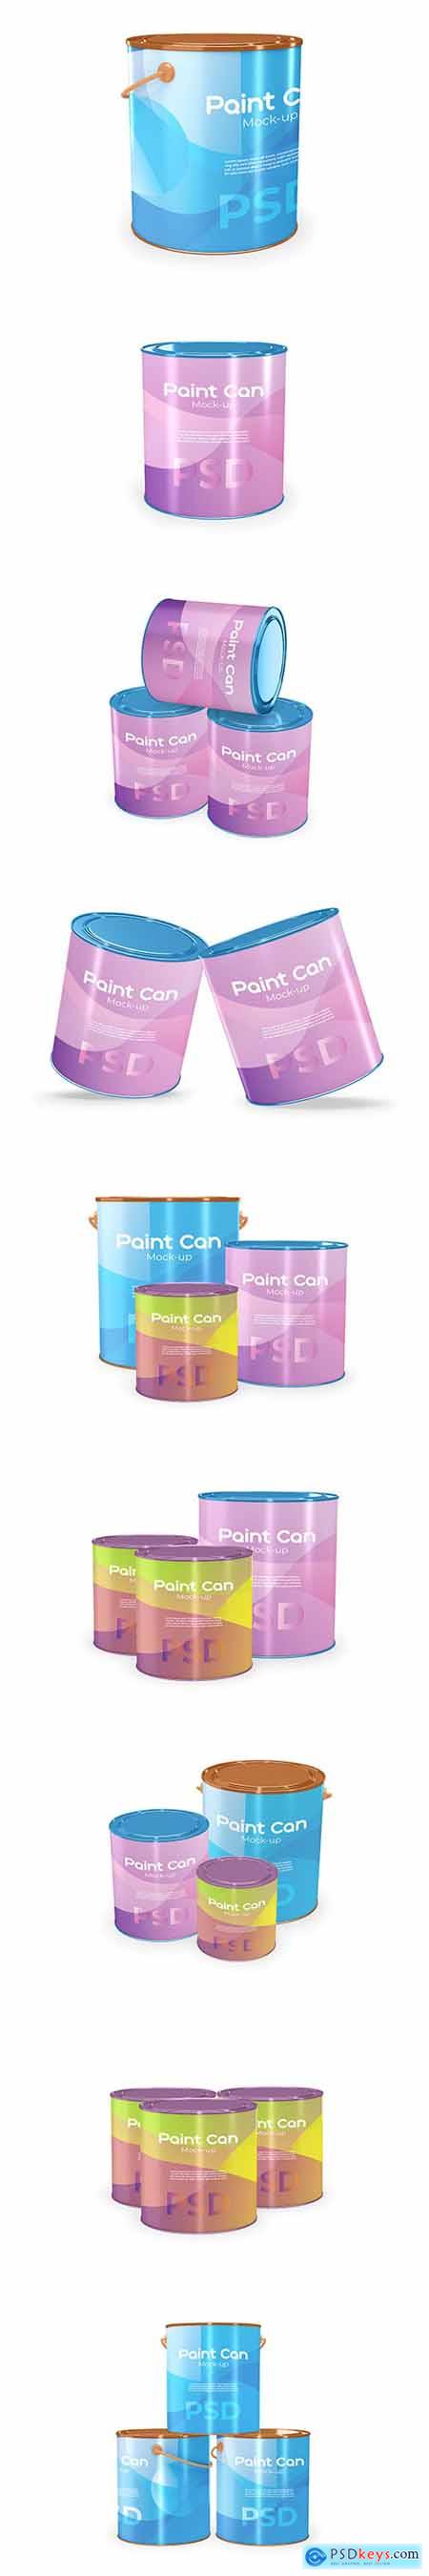 Paint can mockup